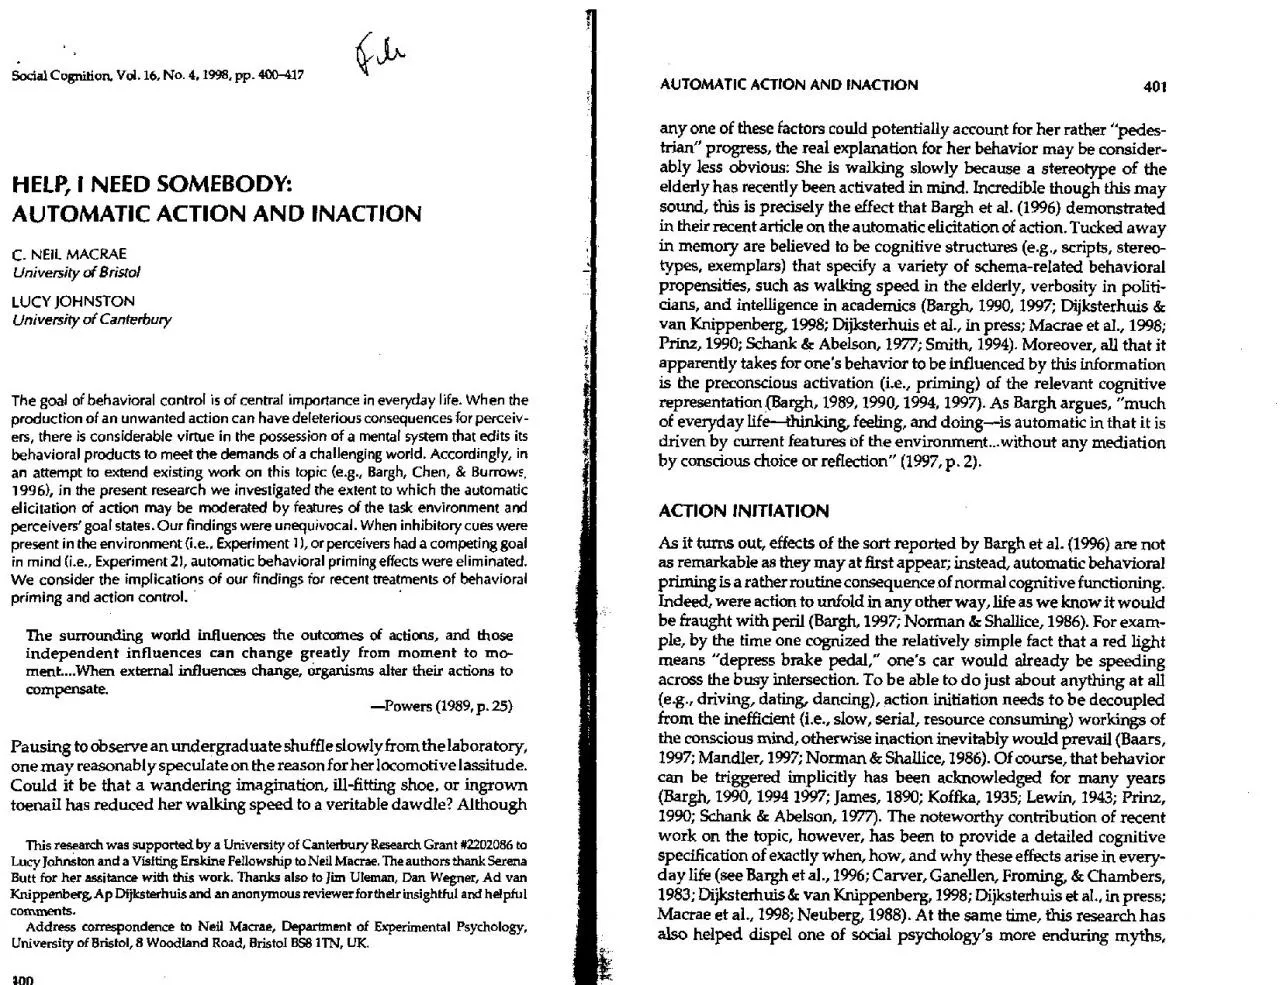 Social Cognition Vol 16 No 41998 pp 400417AUTOMATIC ACTION AND